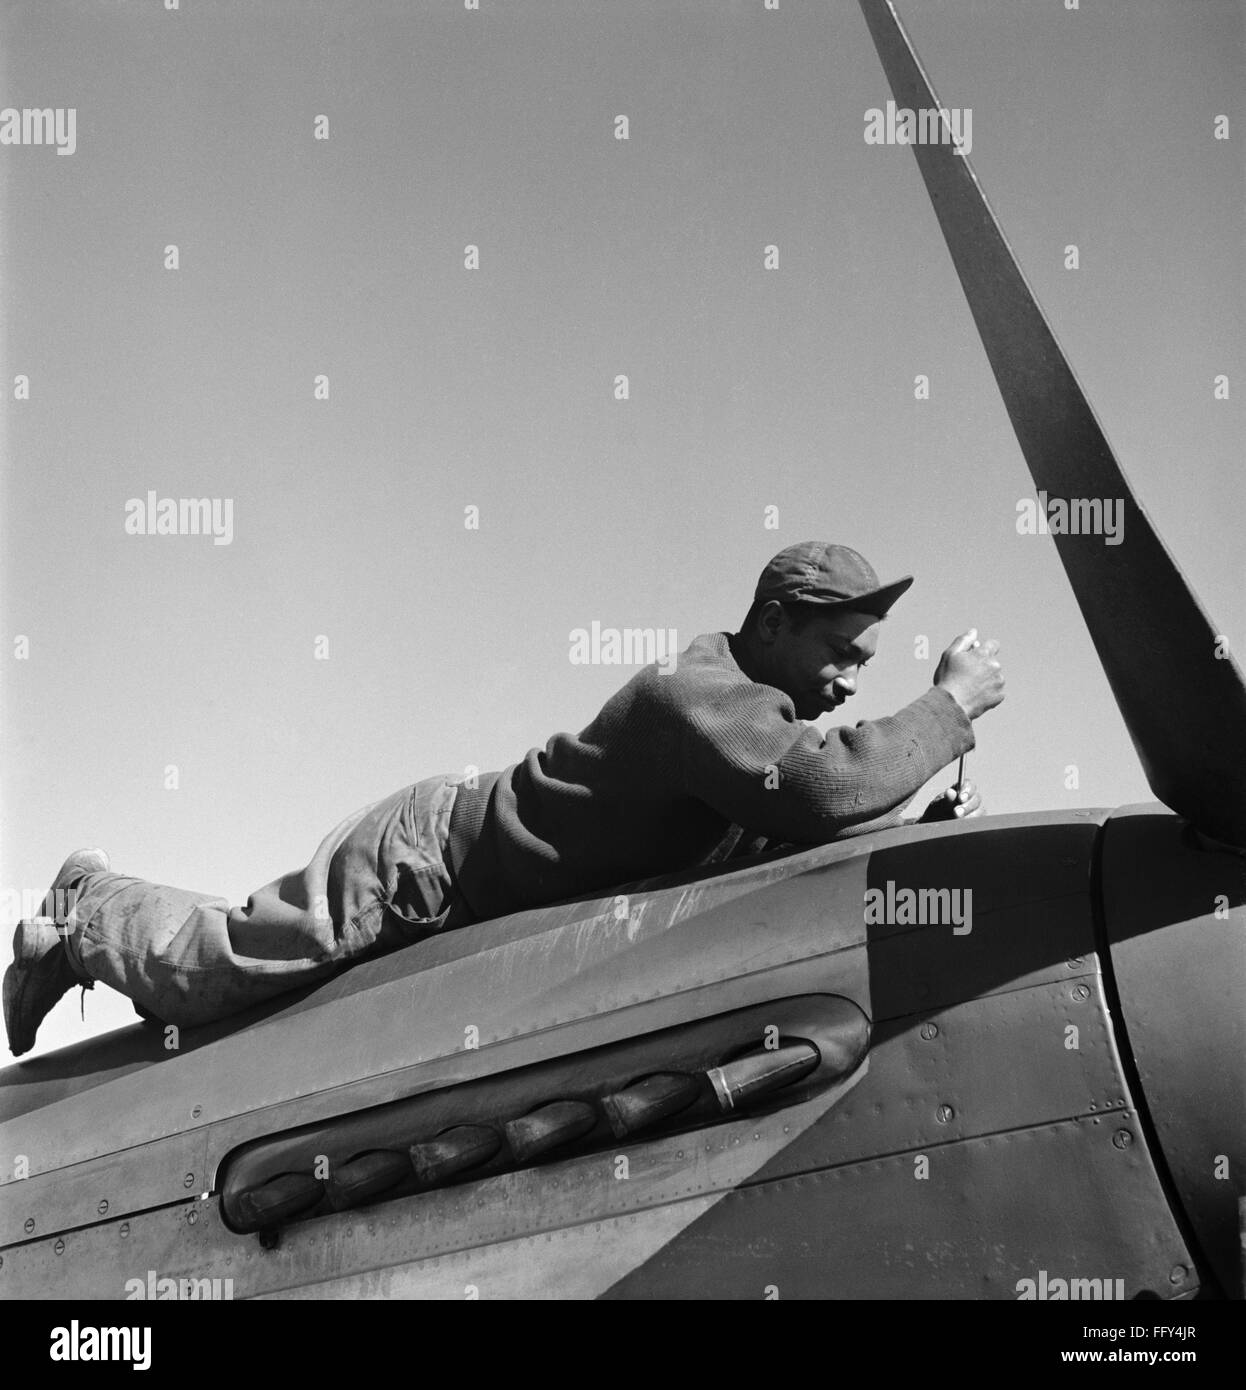 TUSKEGEE AIRMAN, 1945. /nCrew chief Marcellus Smith of the Tuskegee Airmen 100th Fighting Squadron, working on an airplane at Ramitelli Airfield in Italy. Photograph by Toni Frissell, March 1945. Stock Photo